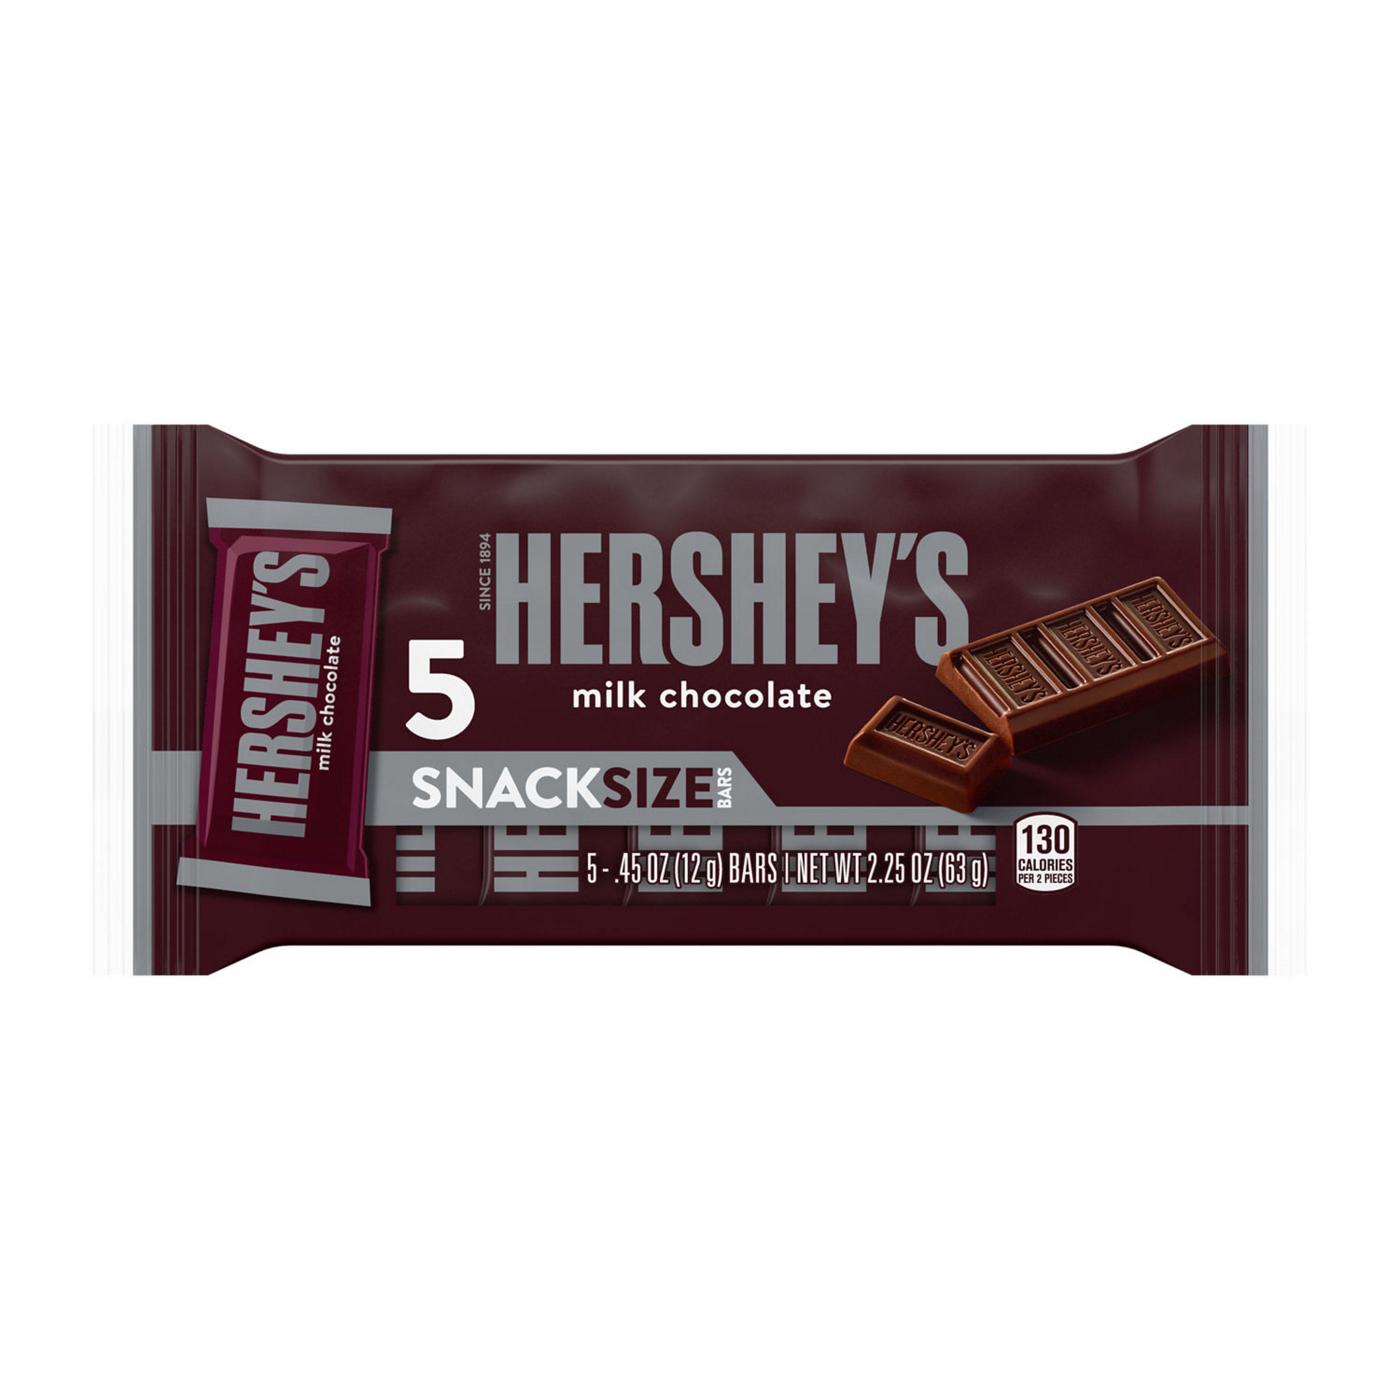 Hershey's Milk Chocolate Snack Size Candy Bars; image 1 of 4